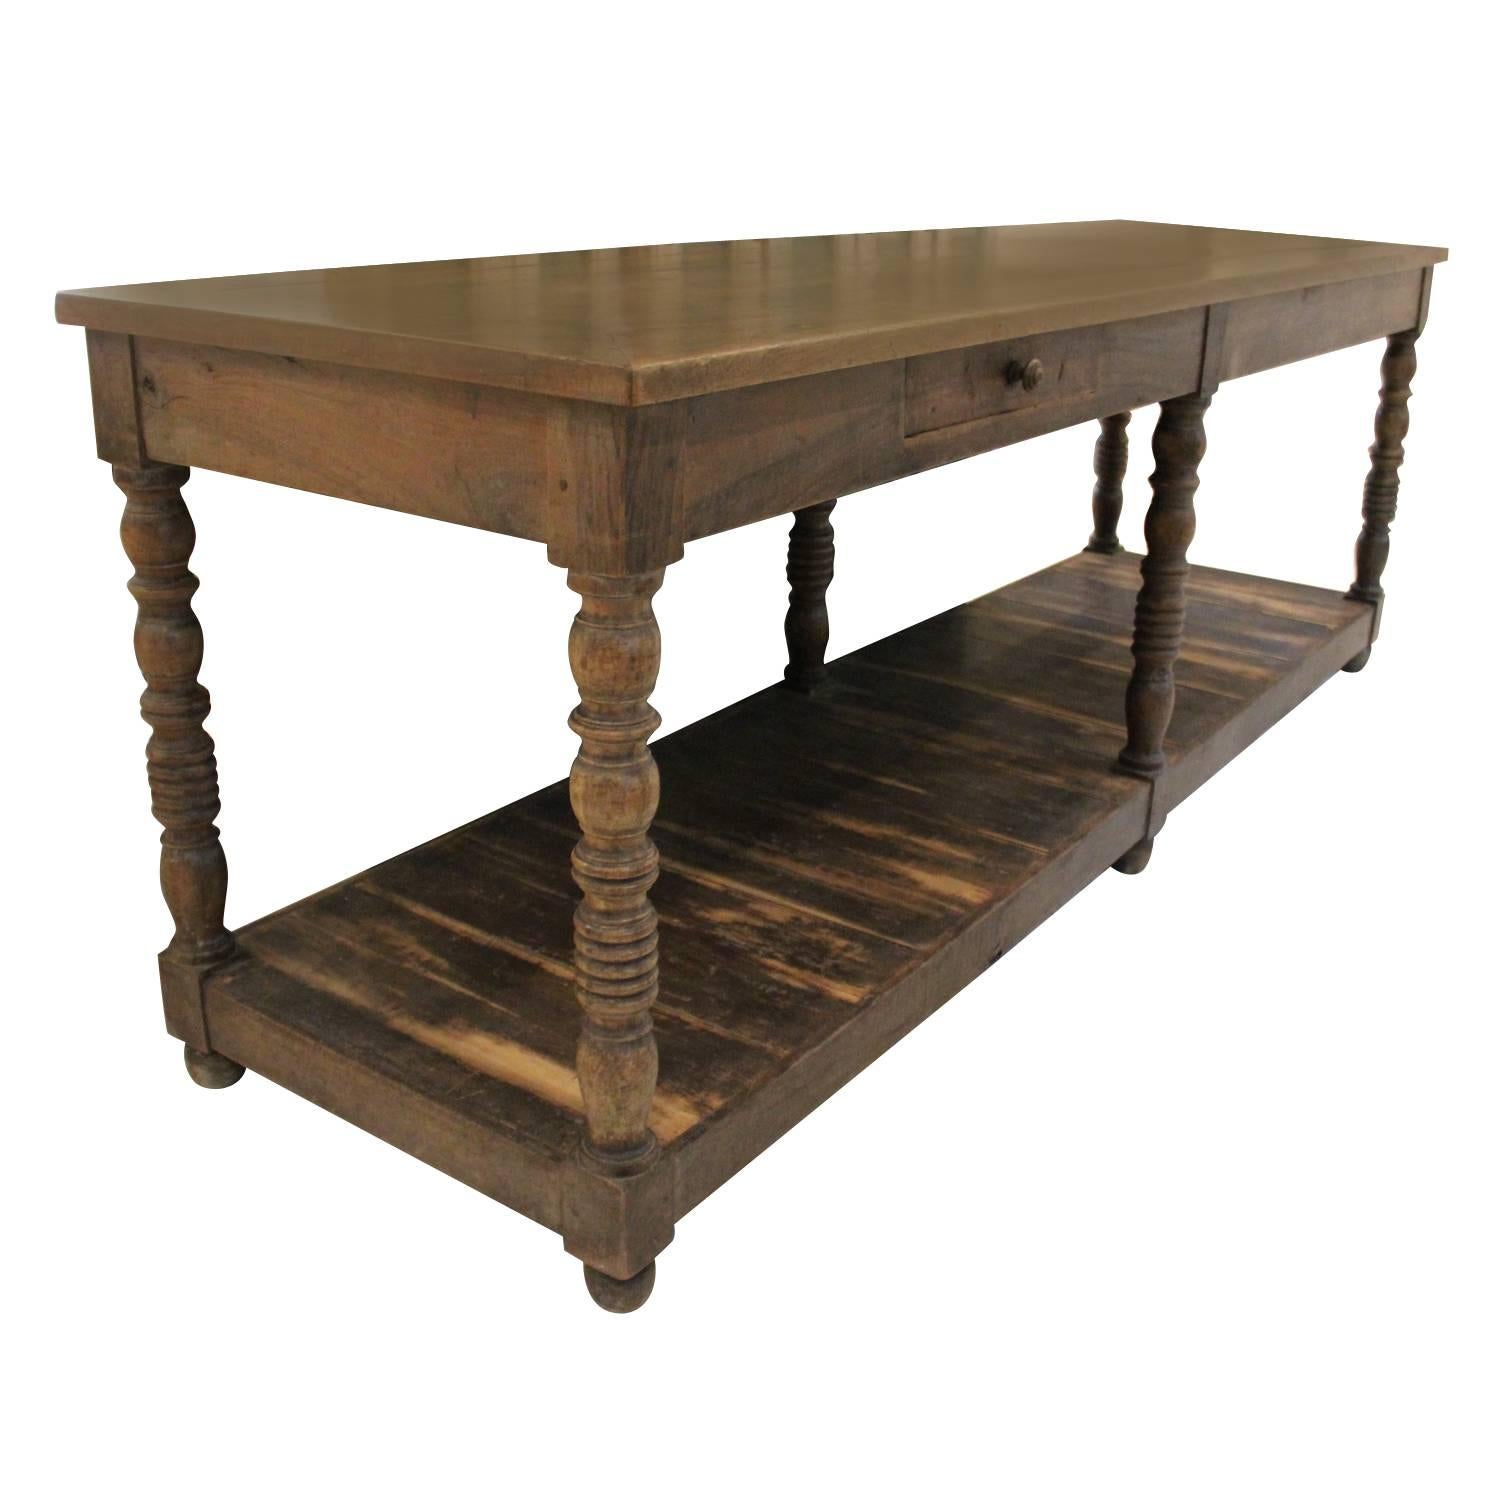 A French draper's table with pot board in walnut wood with a rich, time-worn patina. This beautiful table with single drawer and turned legs would make a wonderful kitchen island, console, serving table, or display table for a restaurant or store.